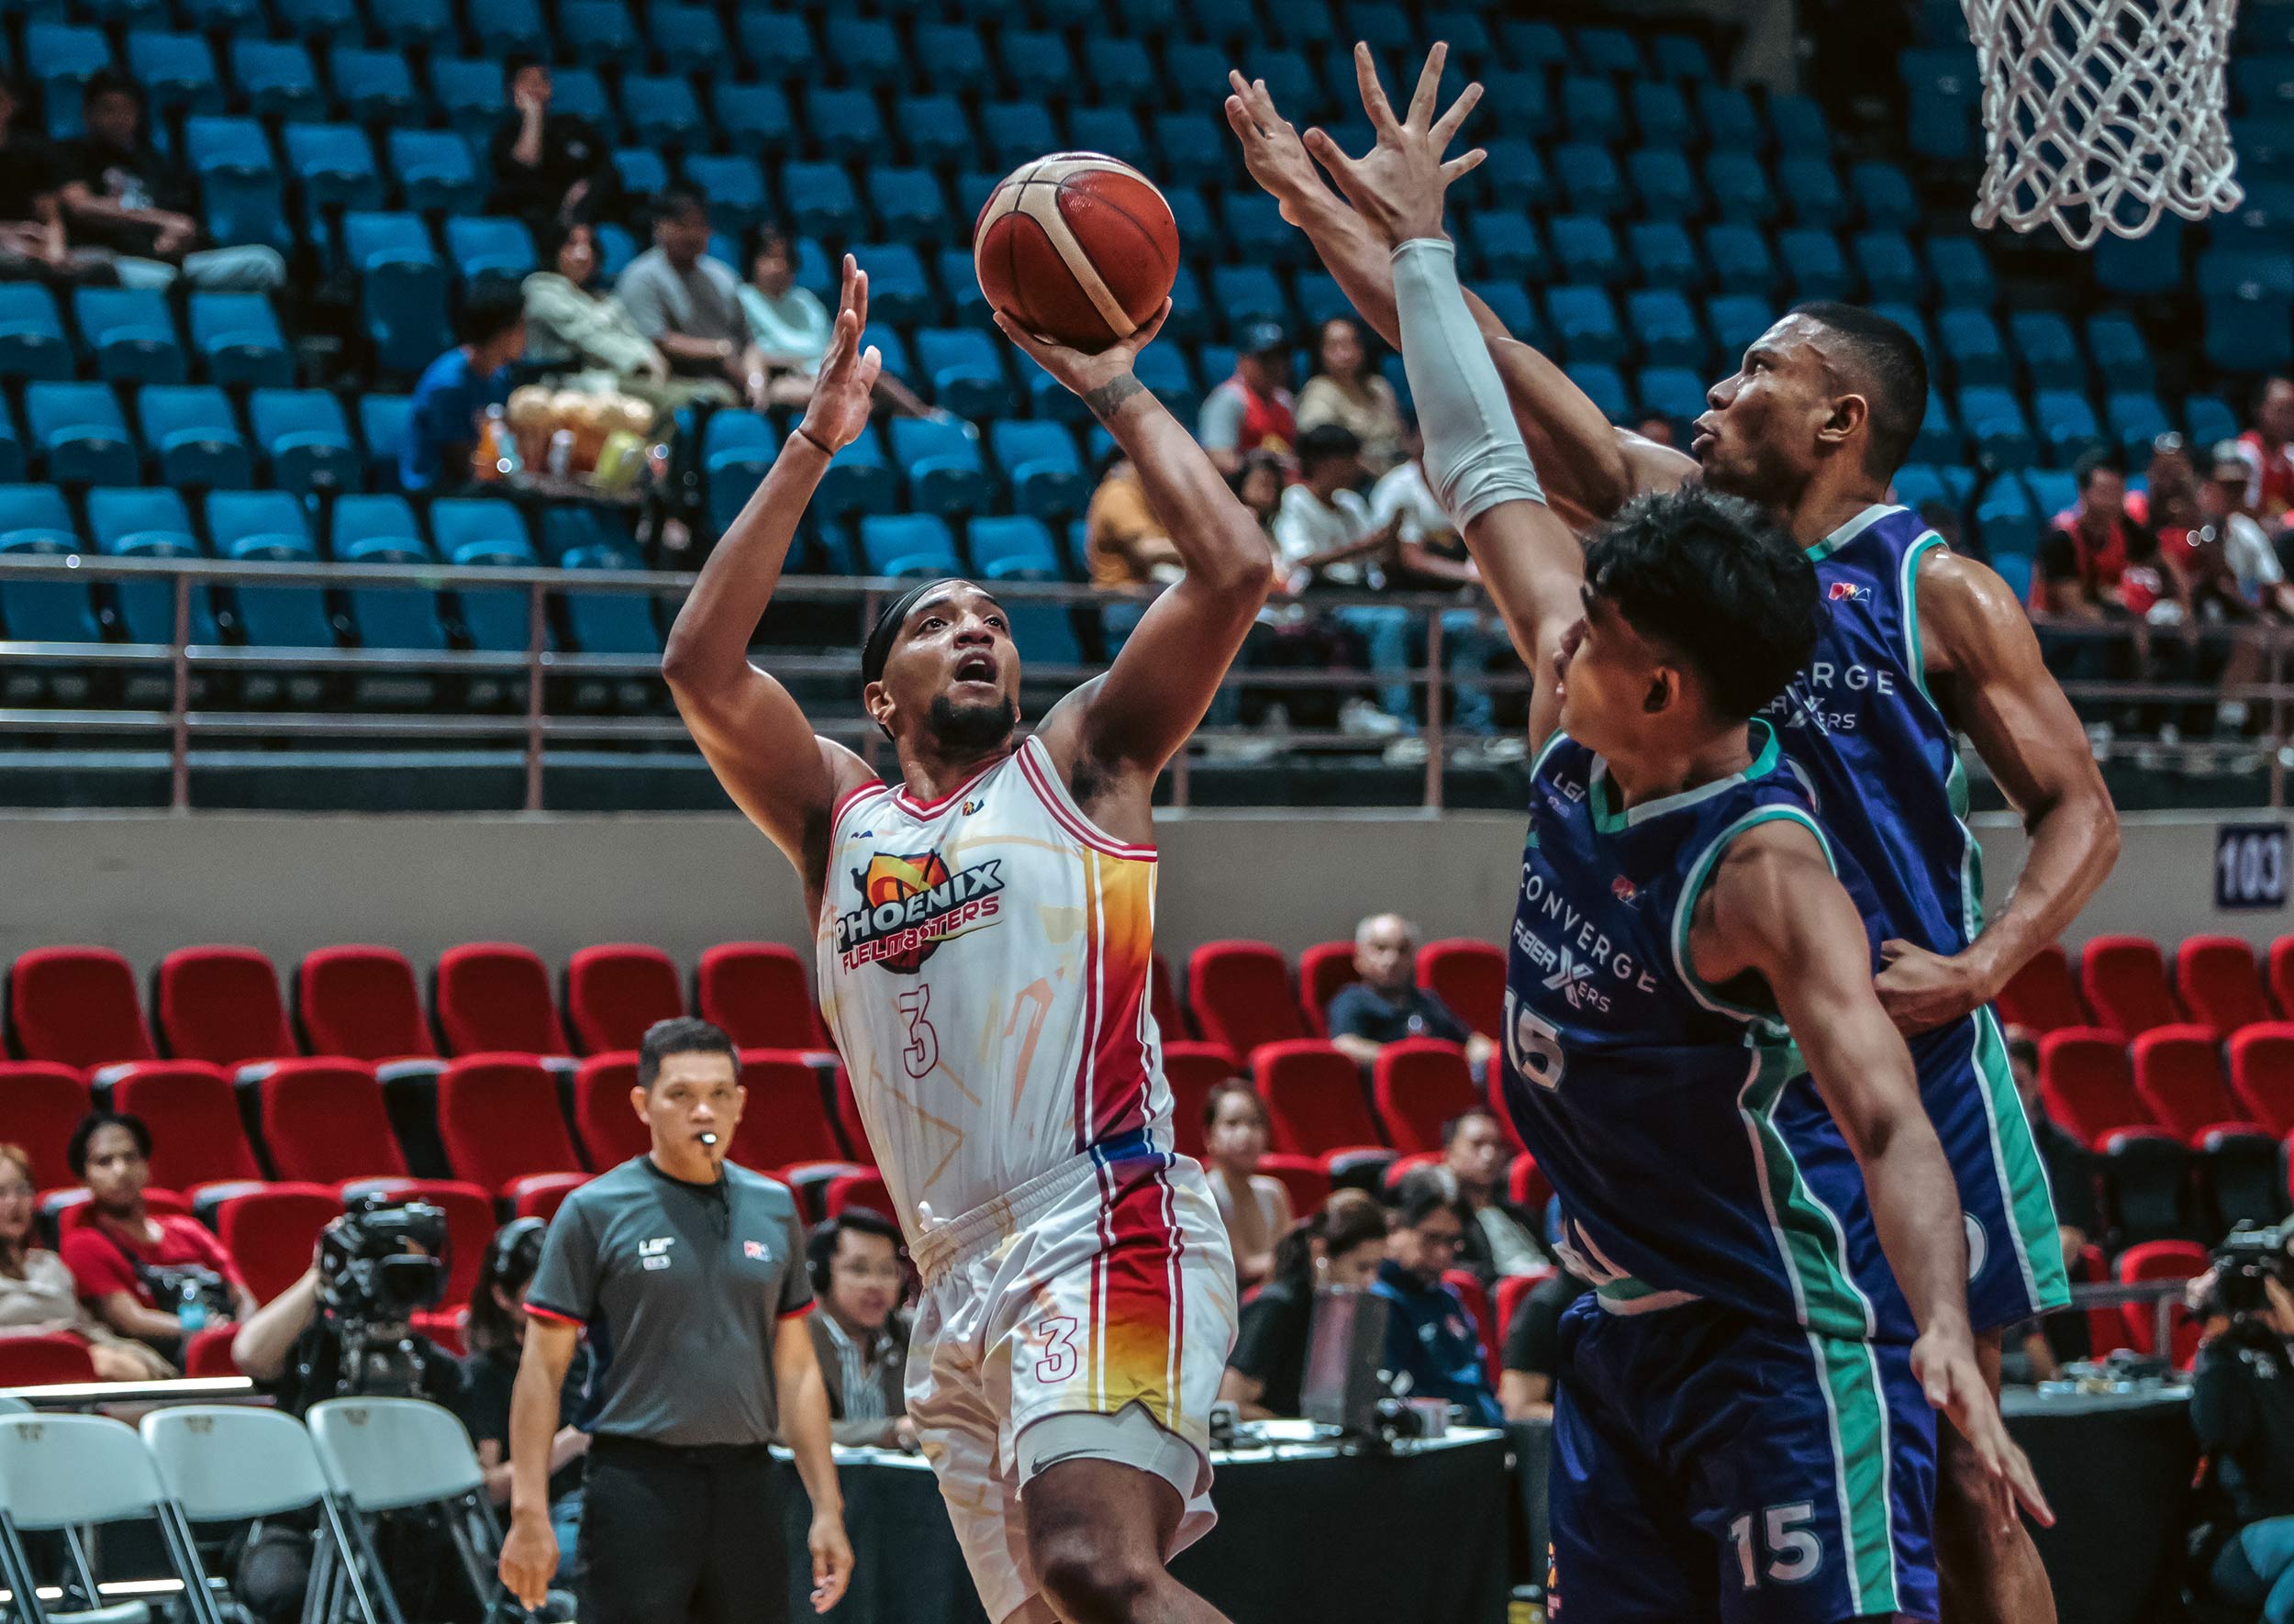 pba: phoenix turns back converge for second win